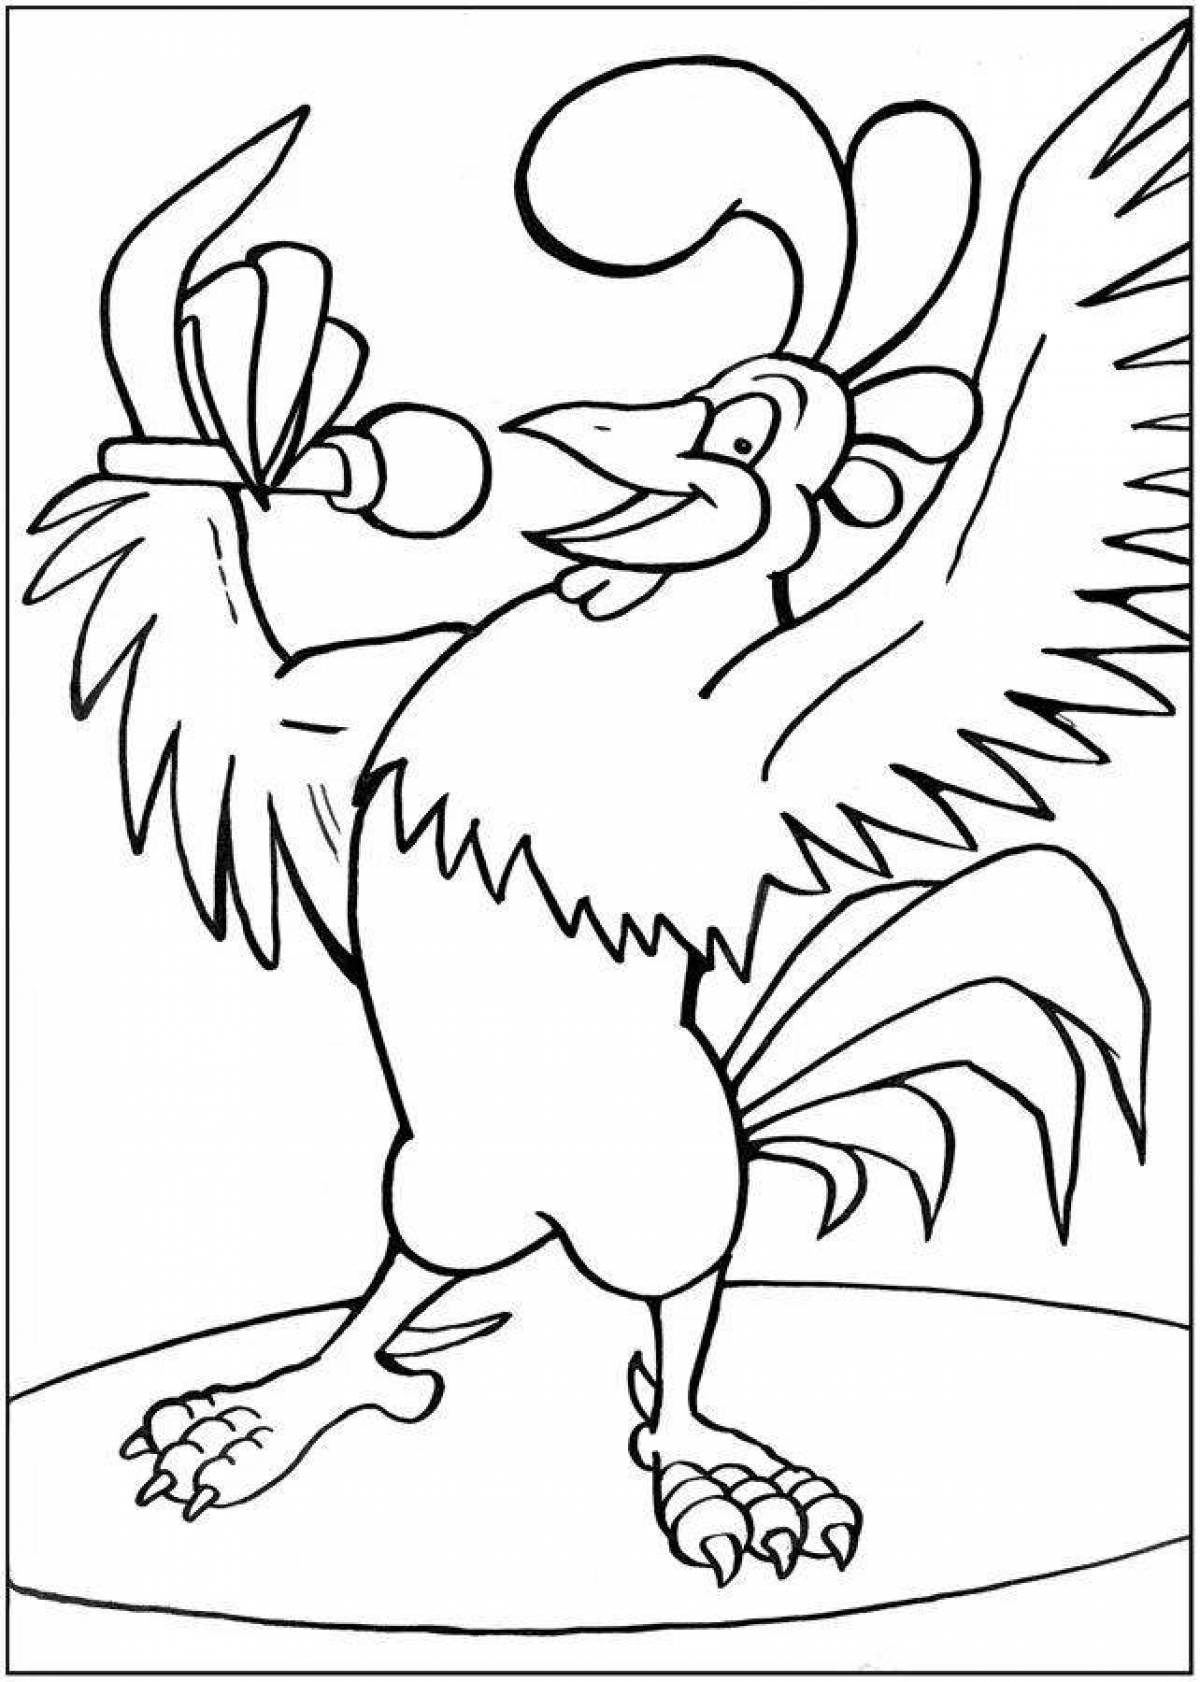 Coloring page wonderful horns and hooves